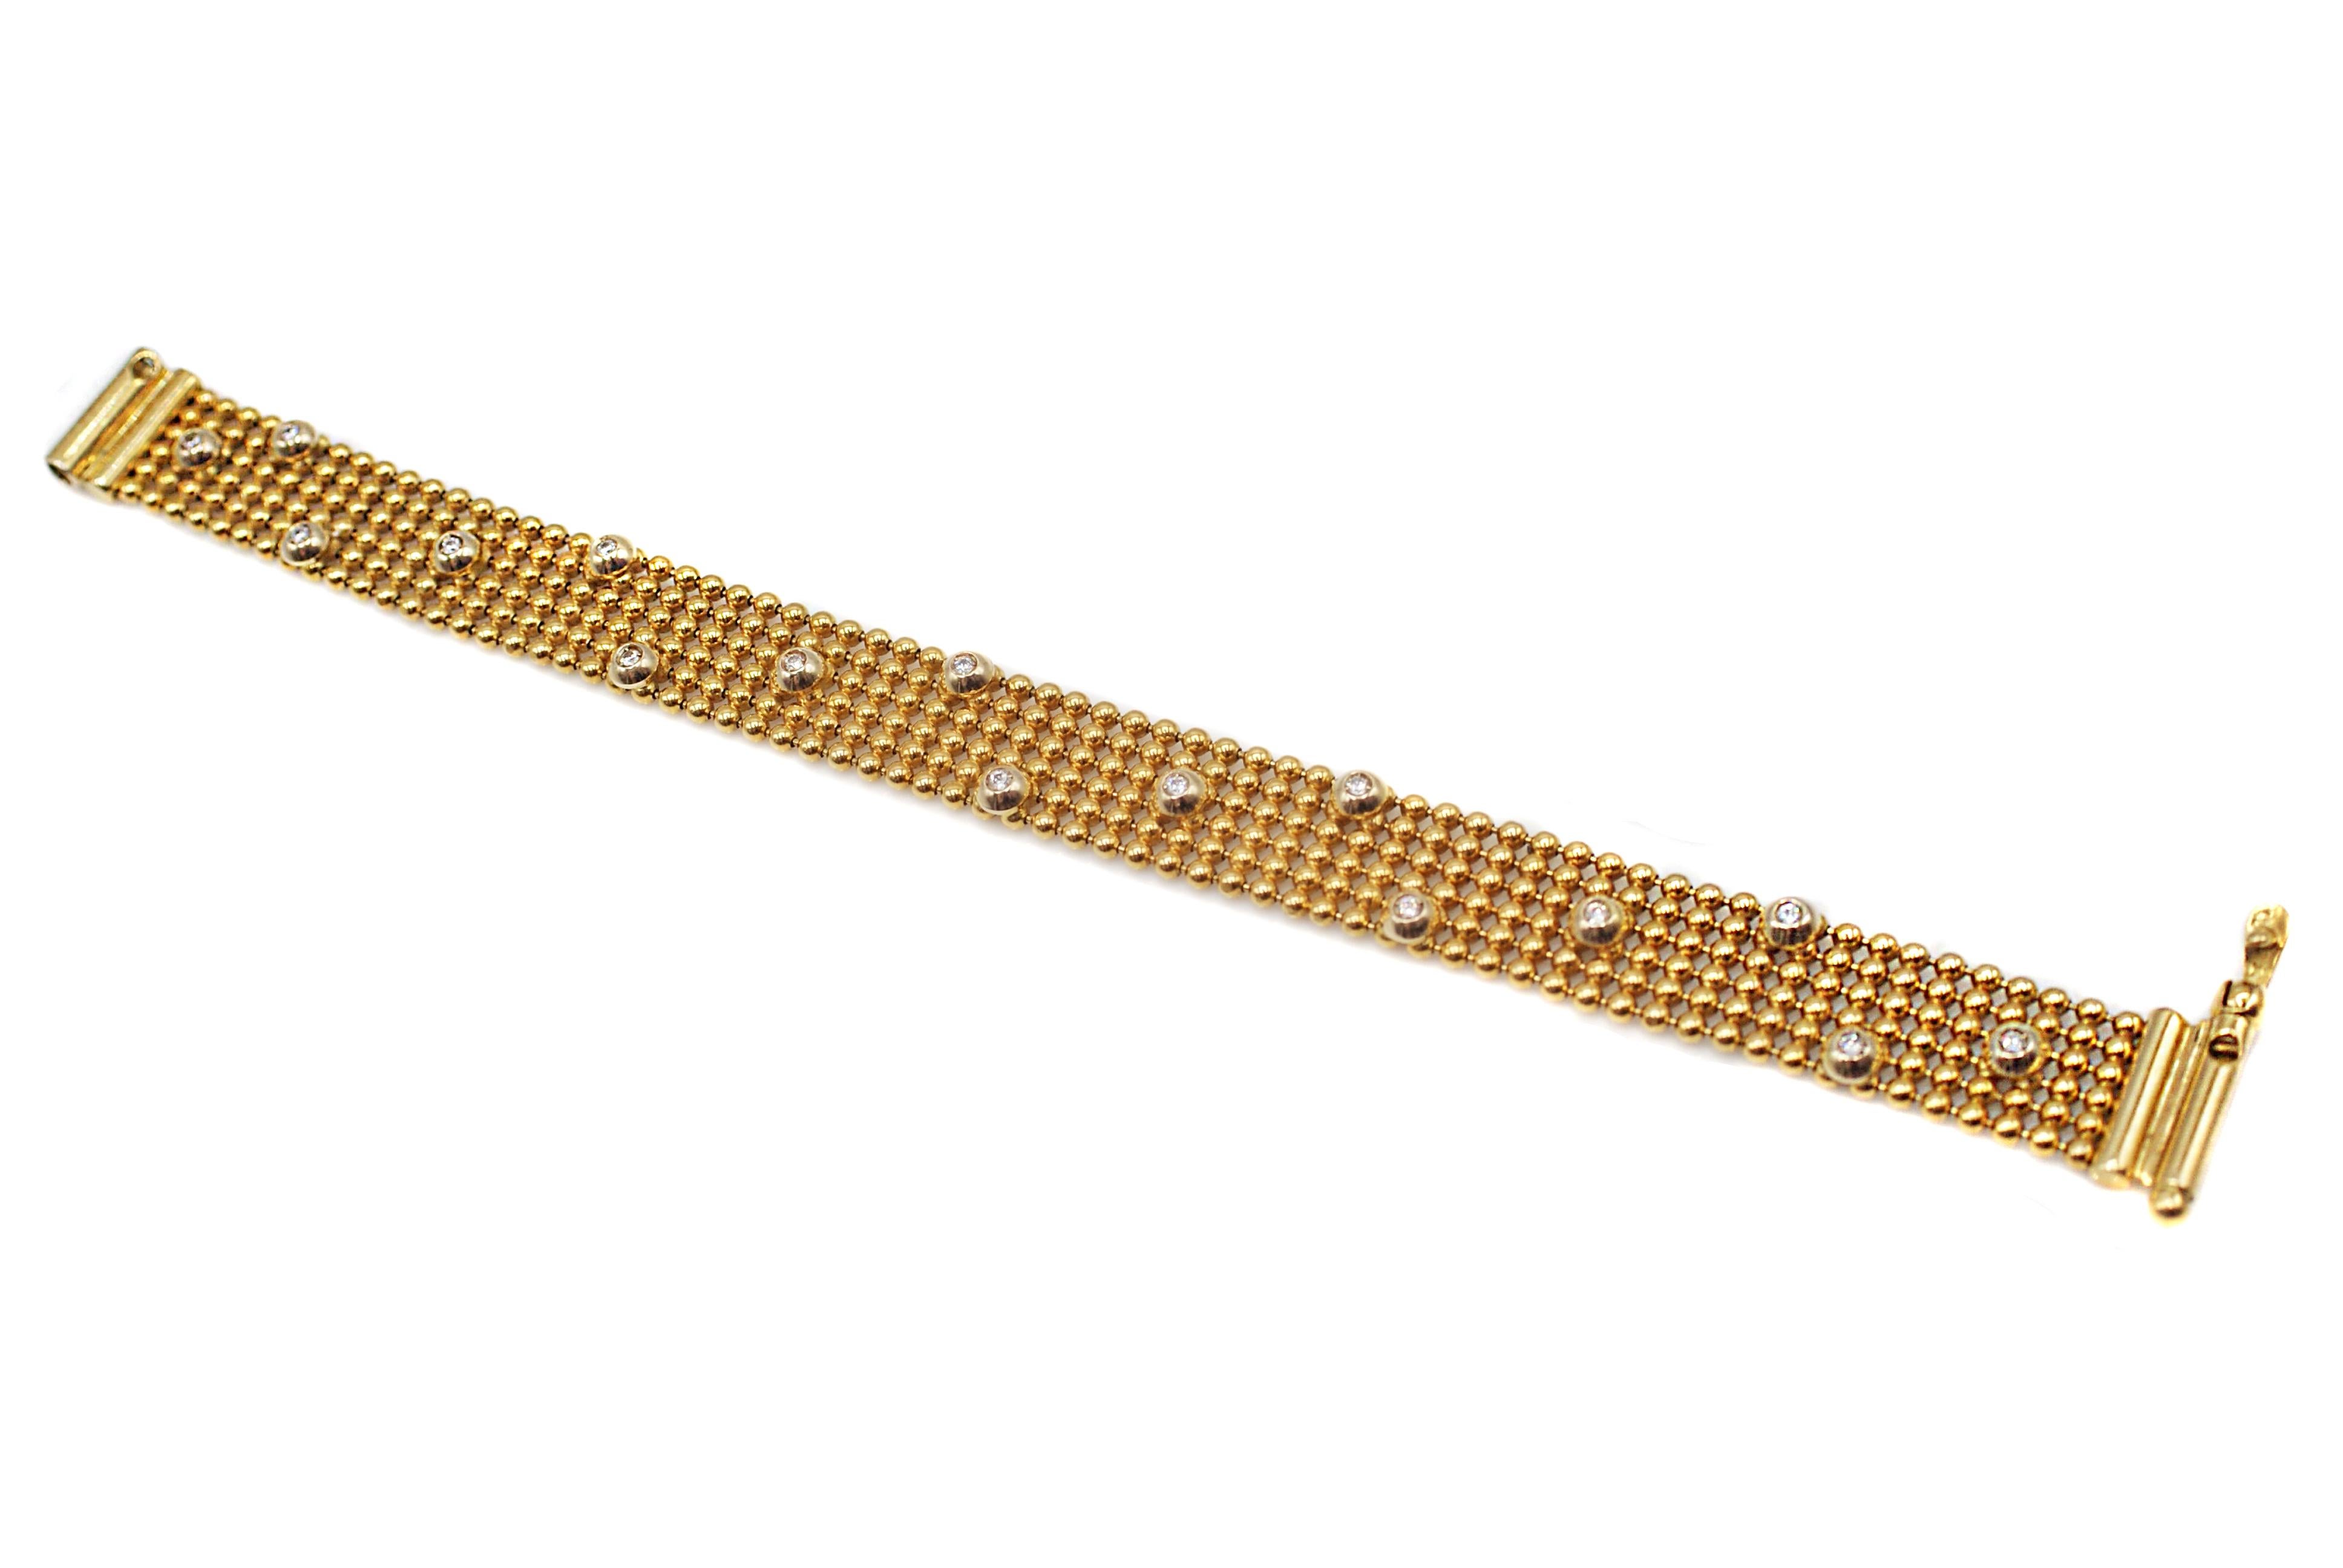 Chic 18 karat yellow gold diamond bracelet, finely handcrafted out of 6 rows of polished round spheres and speckled with bright white round brilliant cut diamonds, bezel set in a dome of polished yellow gold. The smooth finish of this bracelet makes